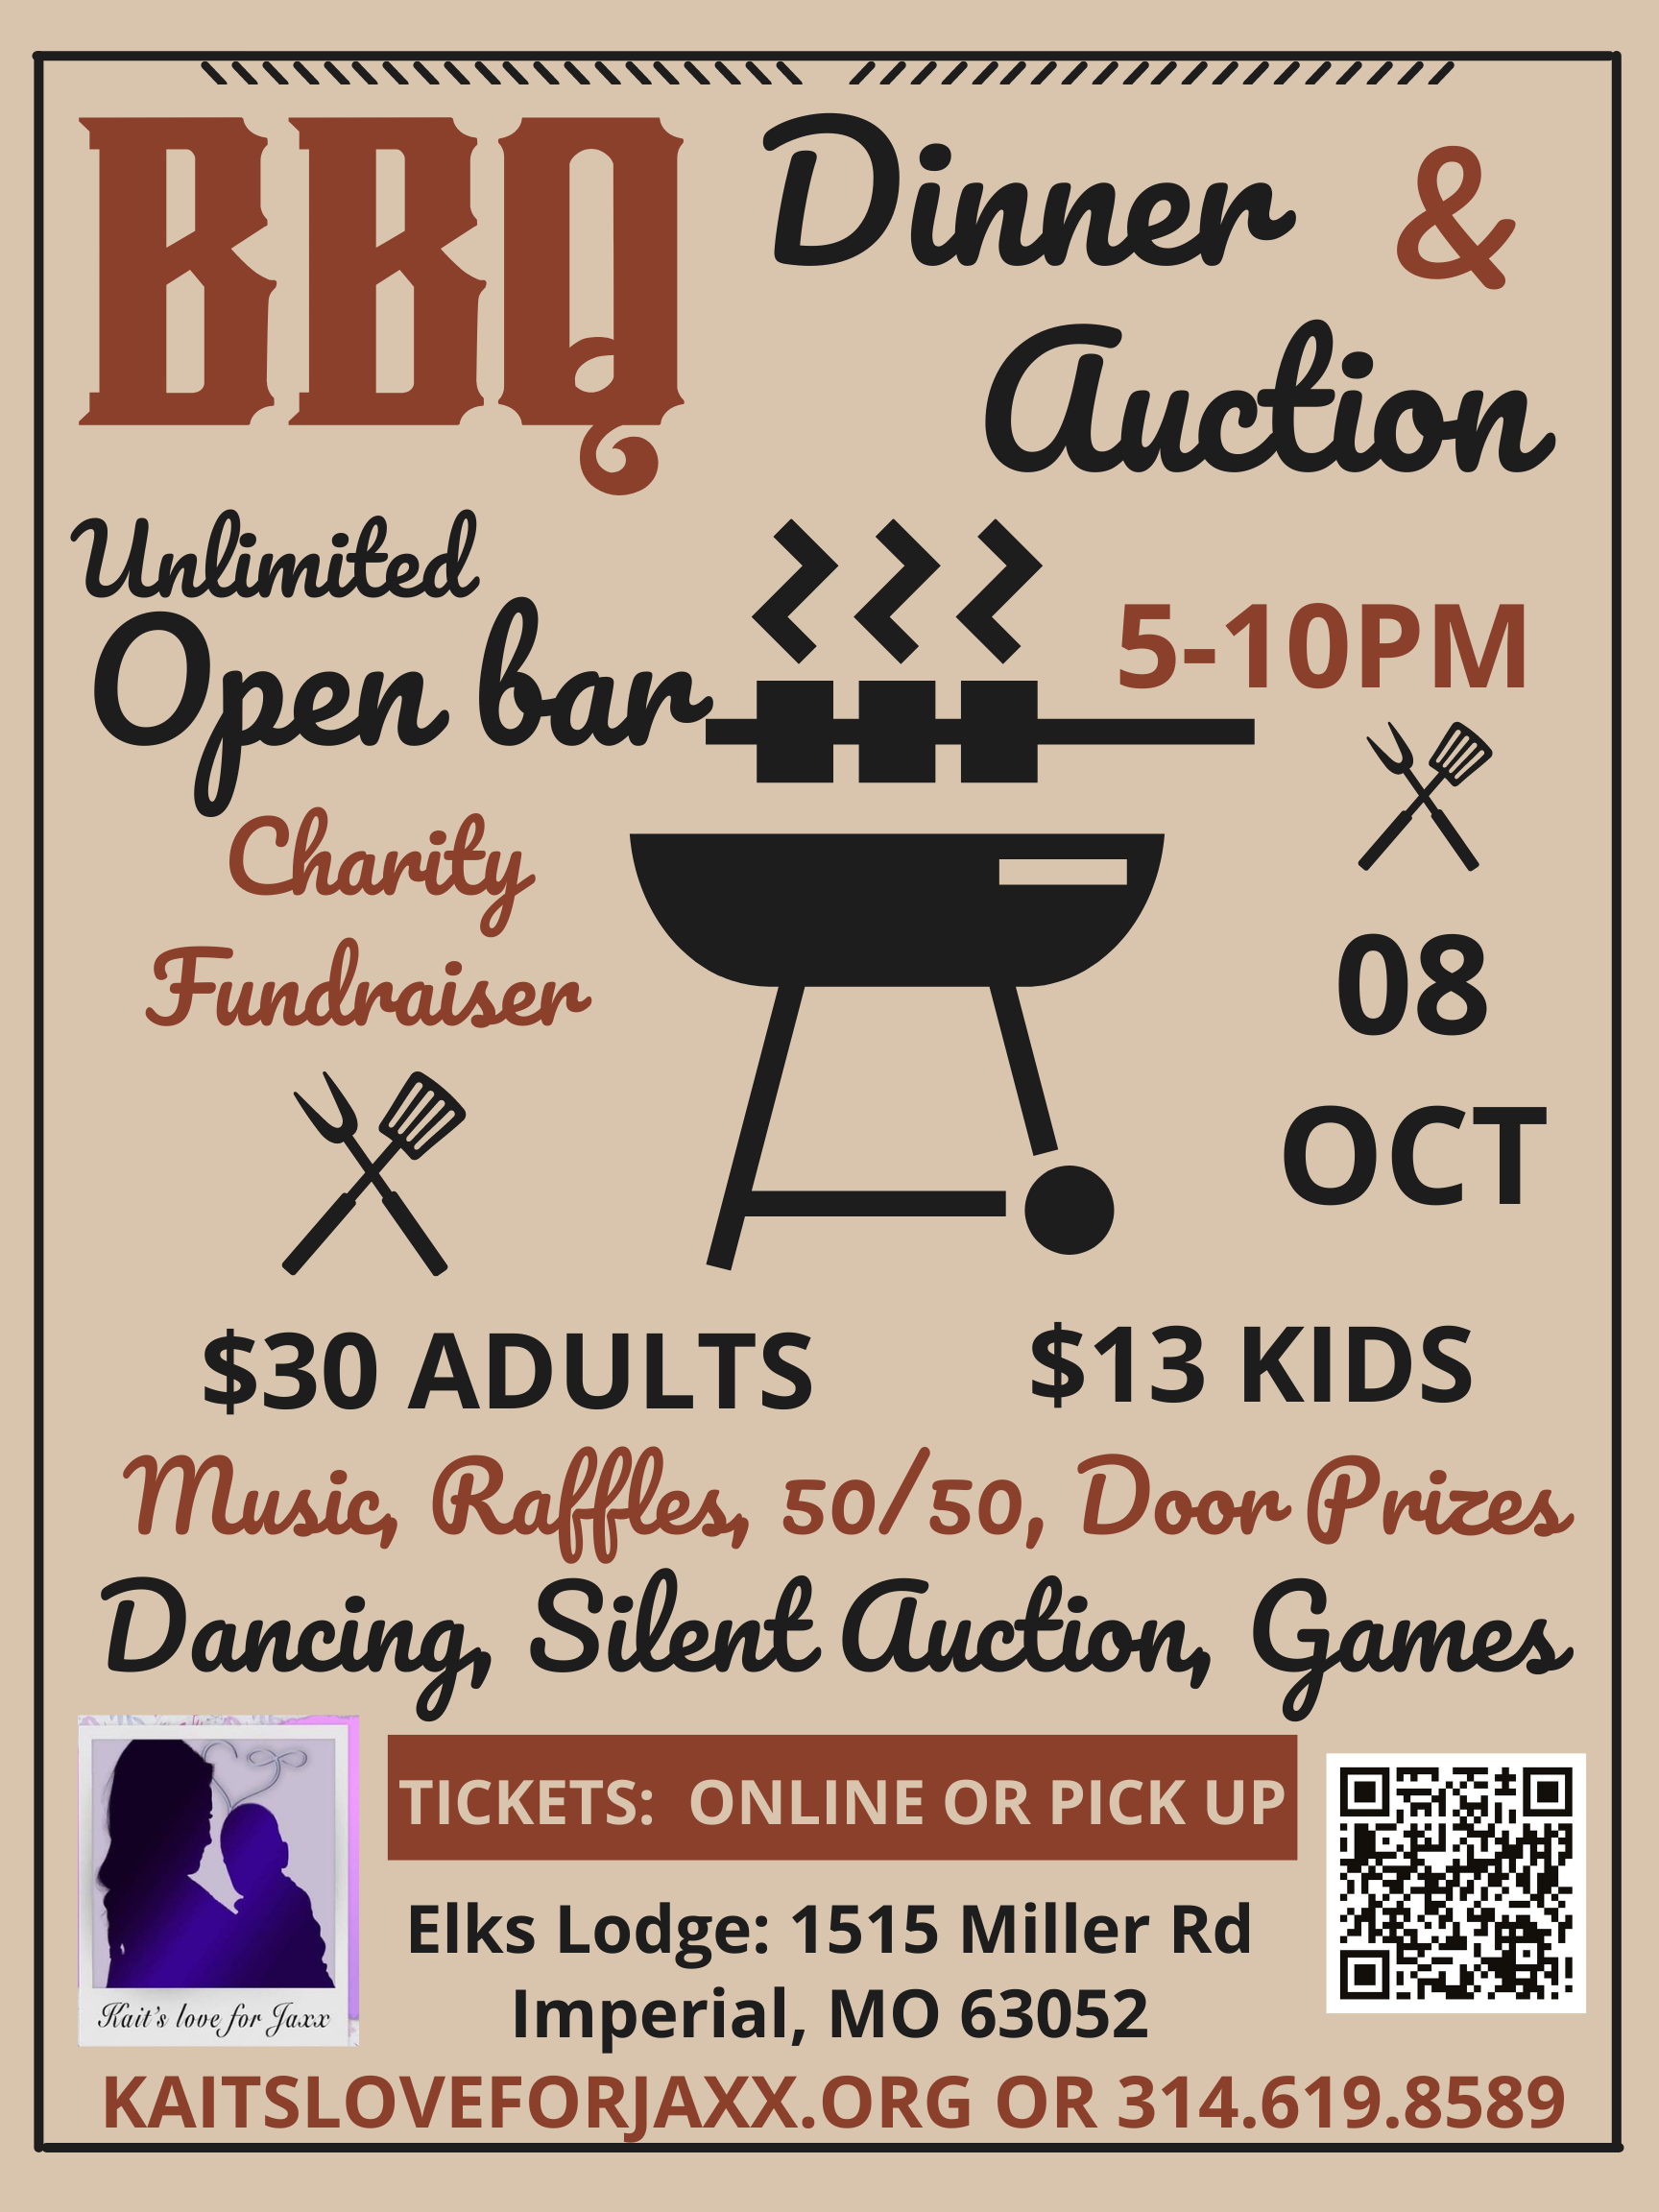 <h1 class="tribe-events-single-event-title">BBQ Dinner, Auction & Dance Fundraiser at Elks Lodge in Imperial in October</h1>